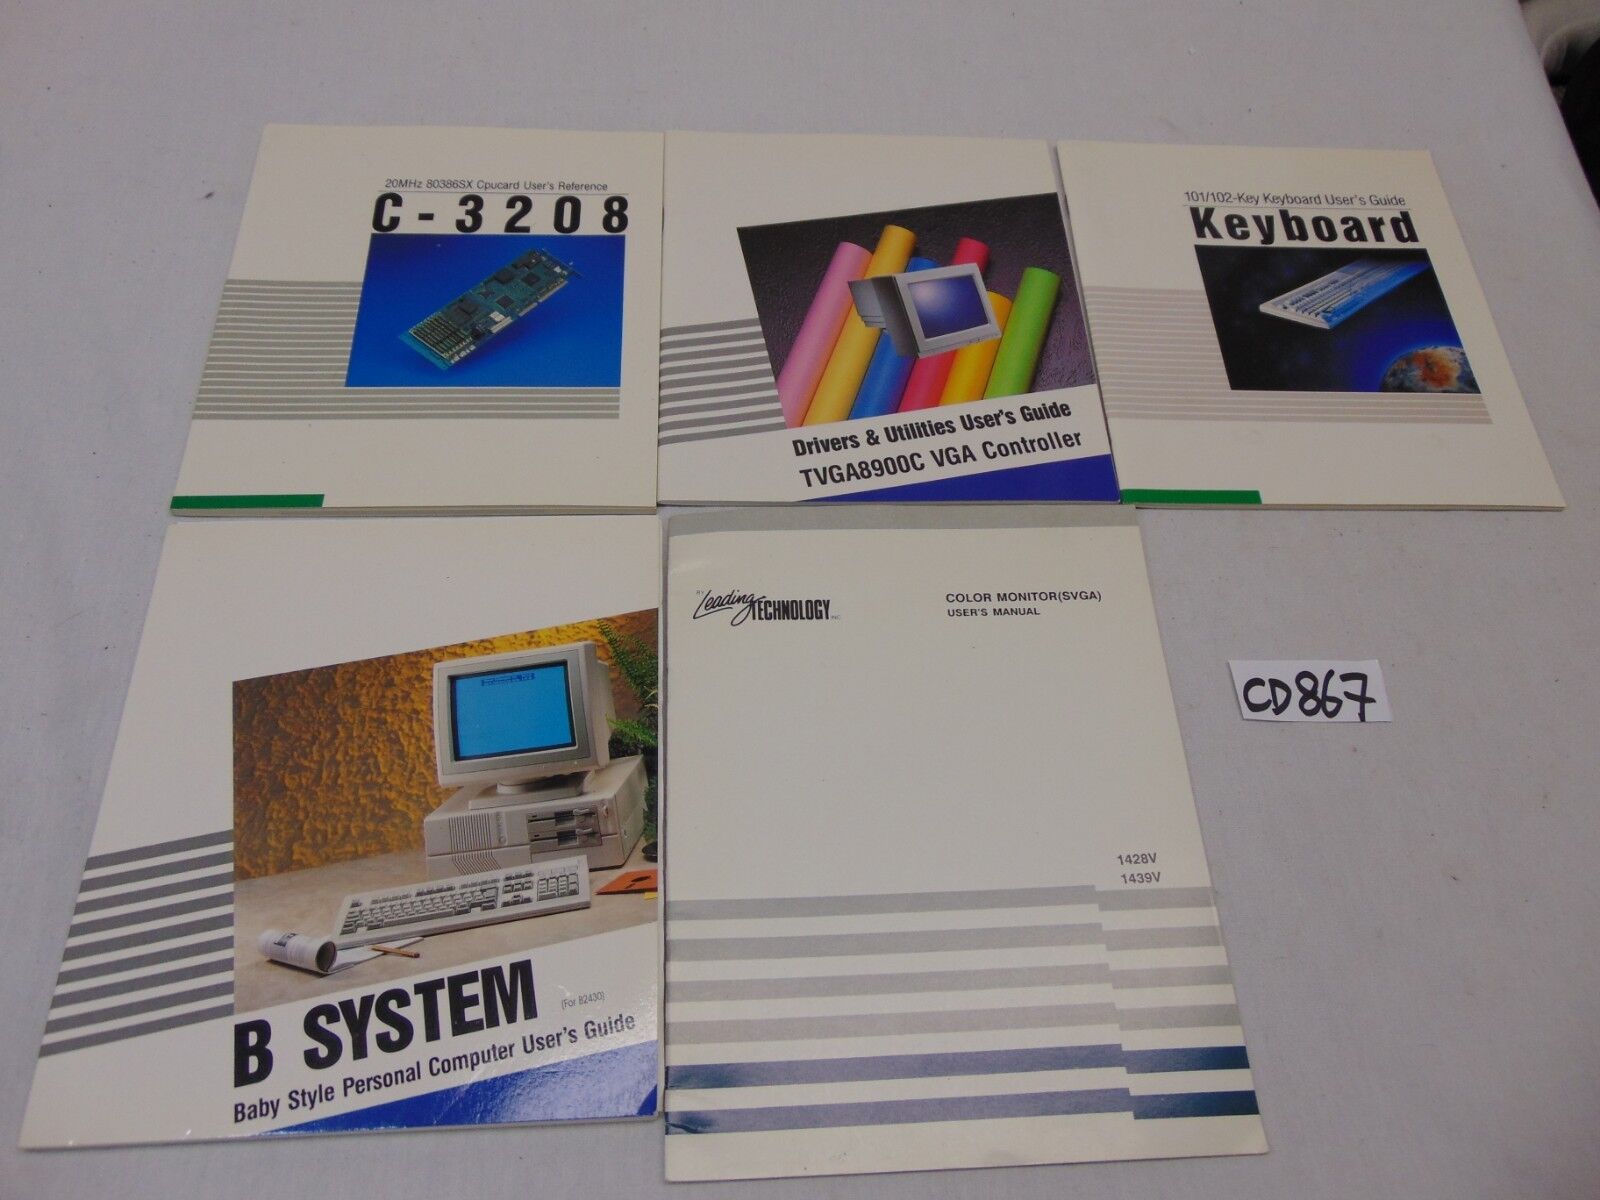 VINTAGE B SYSTEM COMPUTER BABY STYLE USER'S GUIDE LOT LEADING TECHNOLOGY RARE 